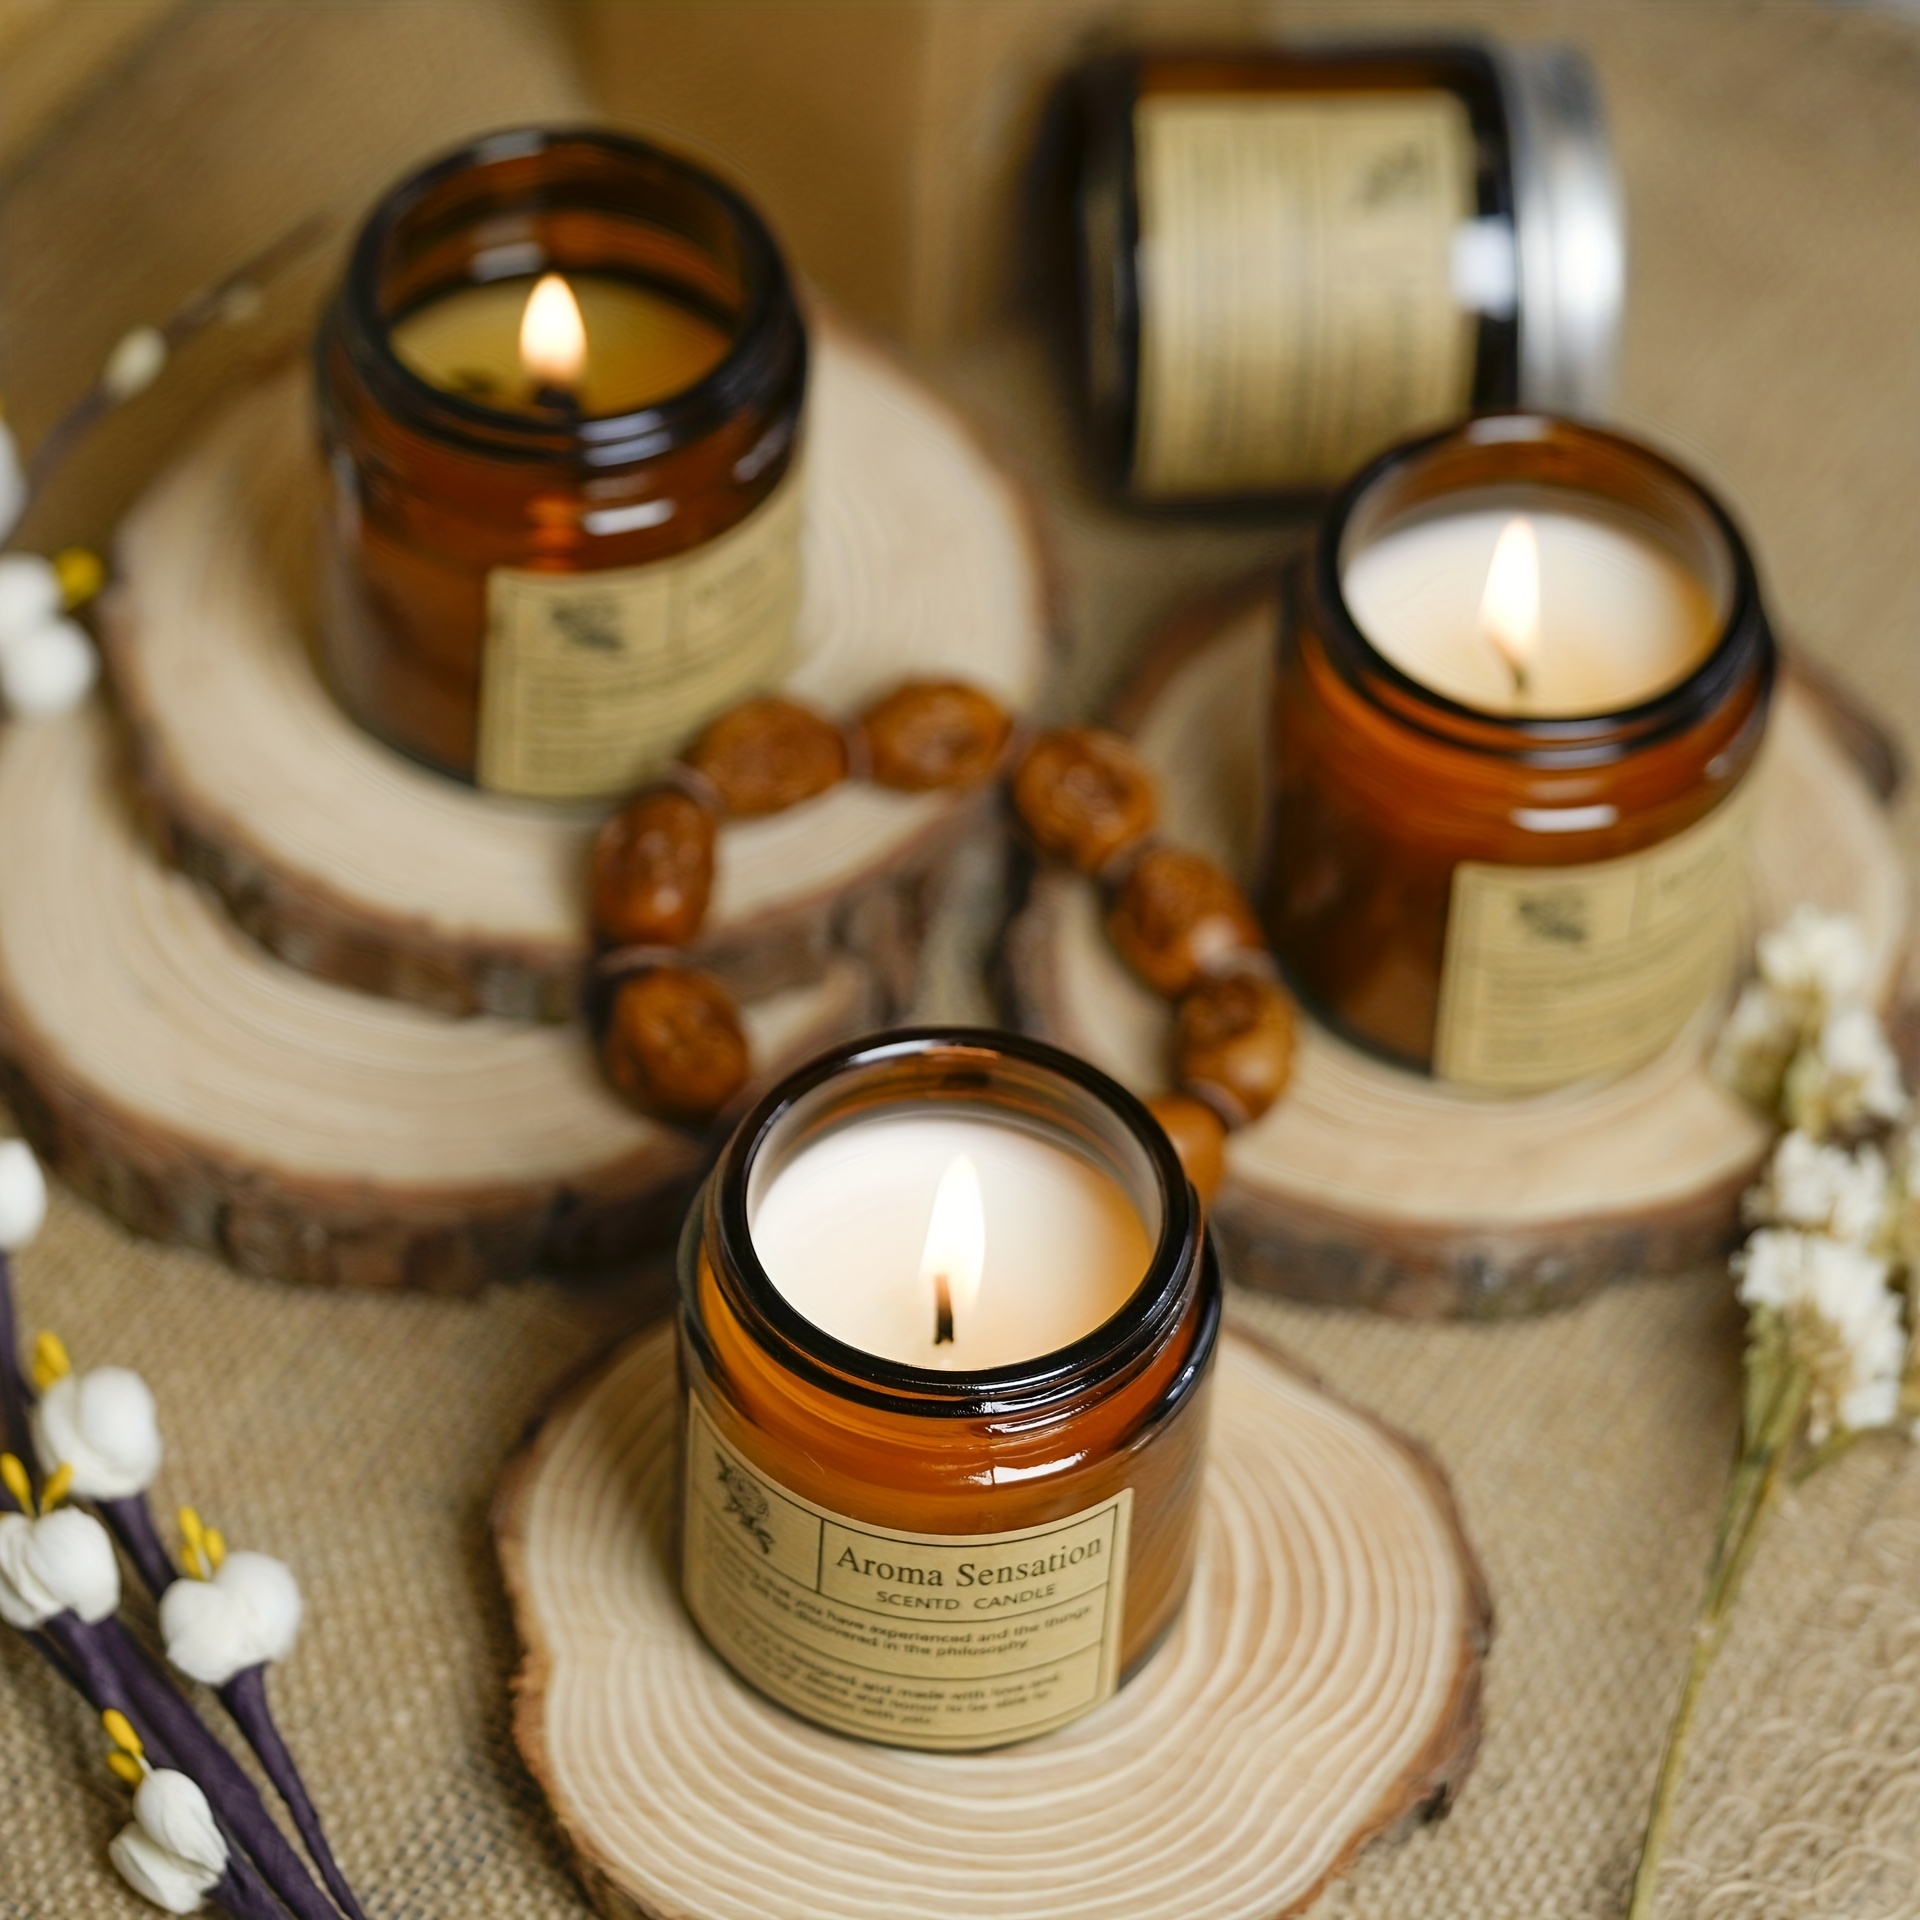 Amber Glass Scented Soy Candles – Craft & Kin